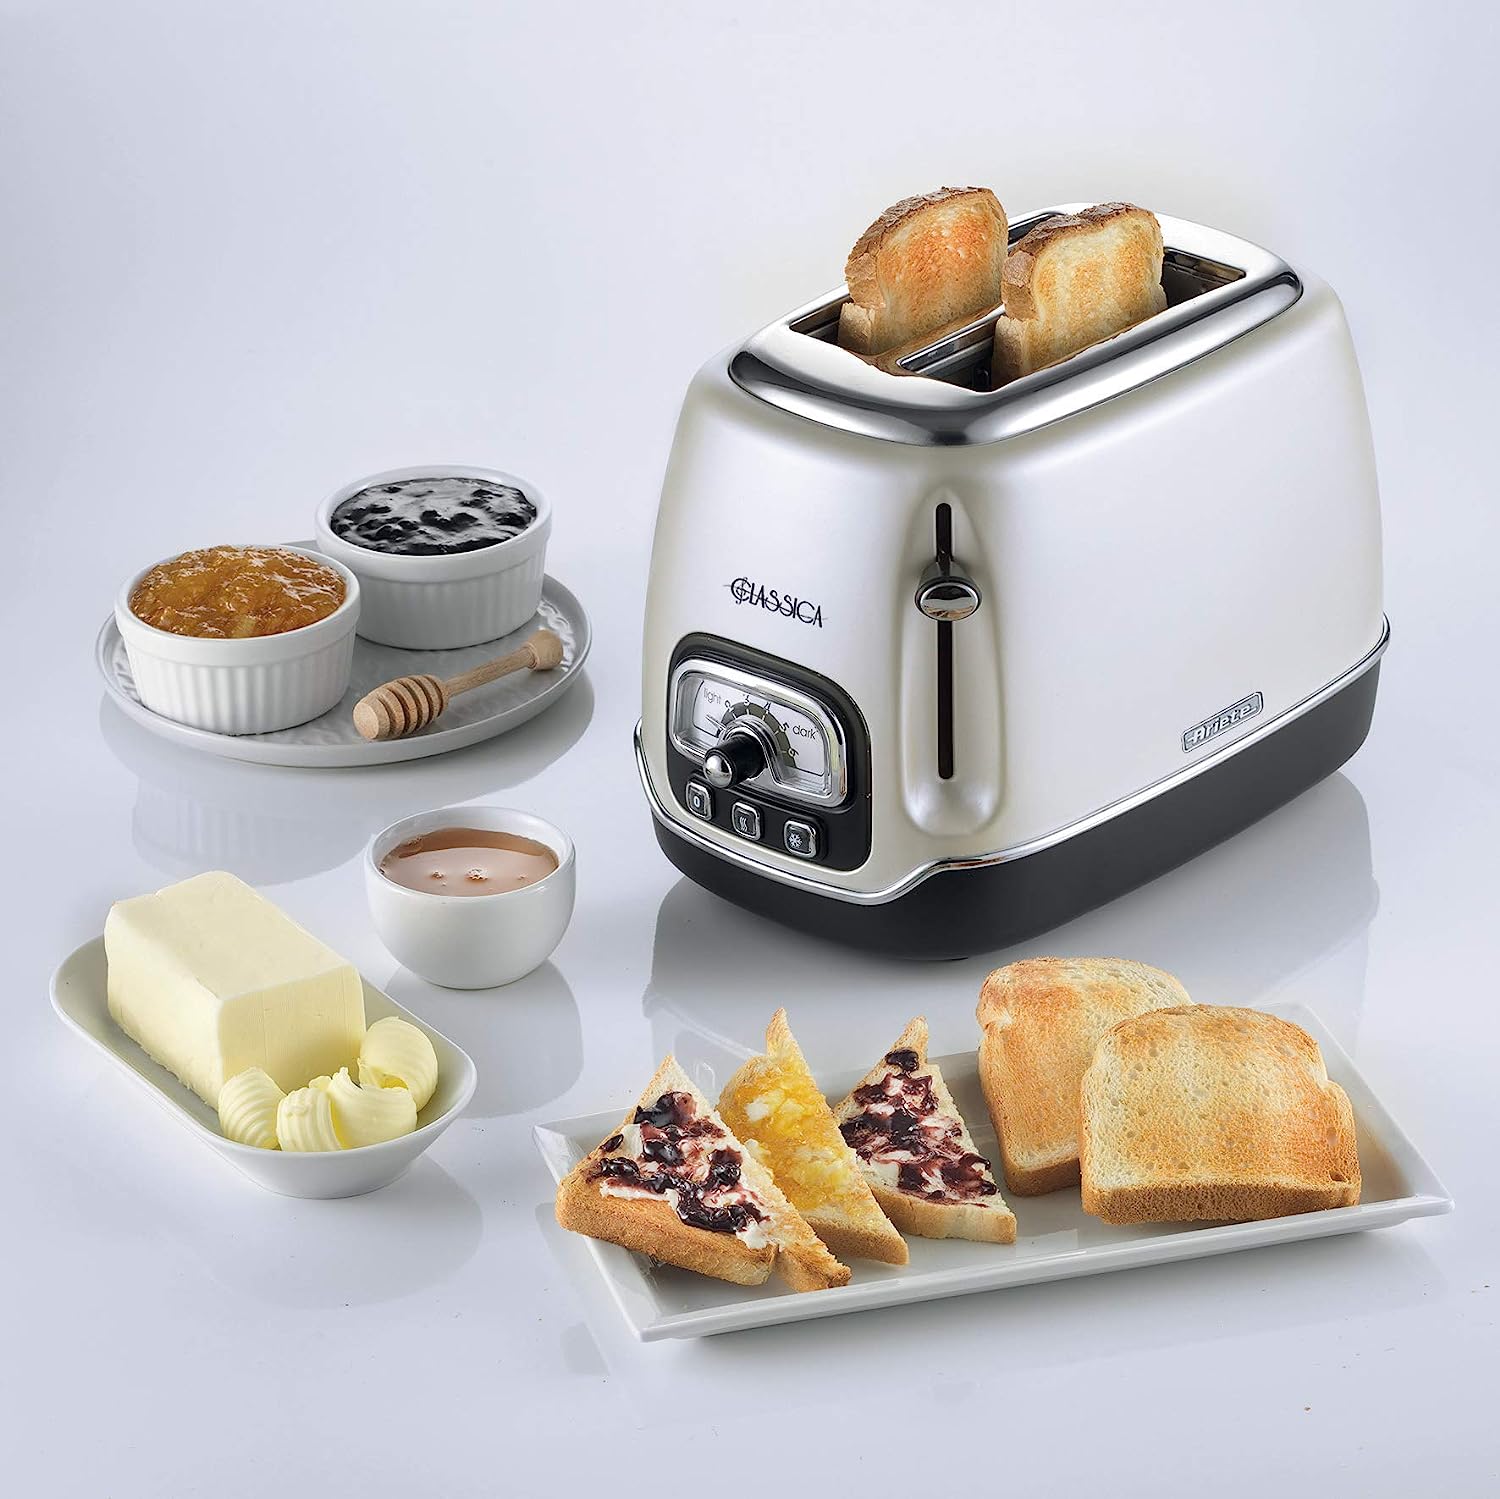 Ariete Tostapane Classica 158/38, Electric Toaster 2 Slices, Without Tongs,  815 W, 3 Functions, 6 Browning Levels, PEARL